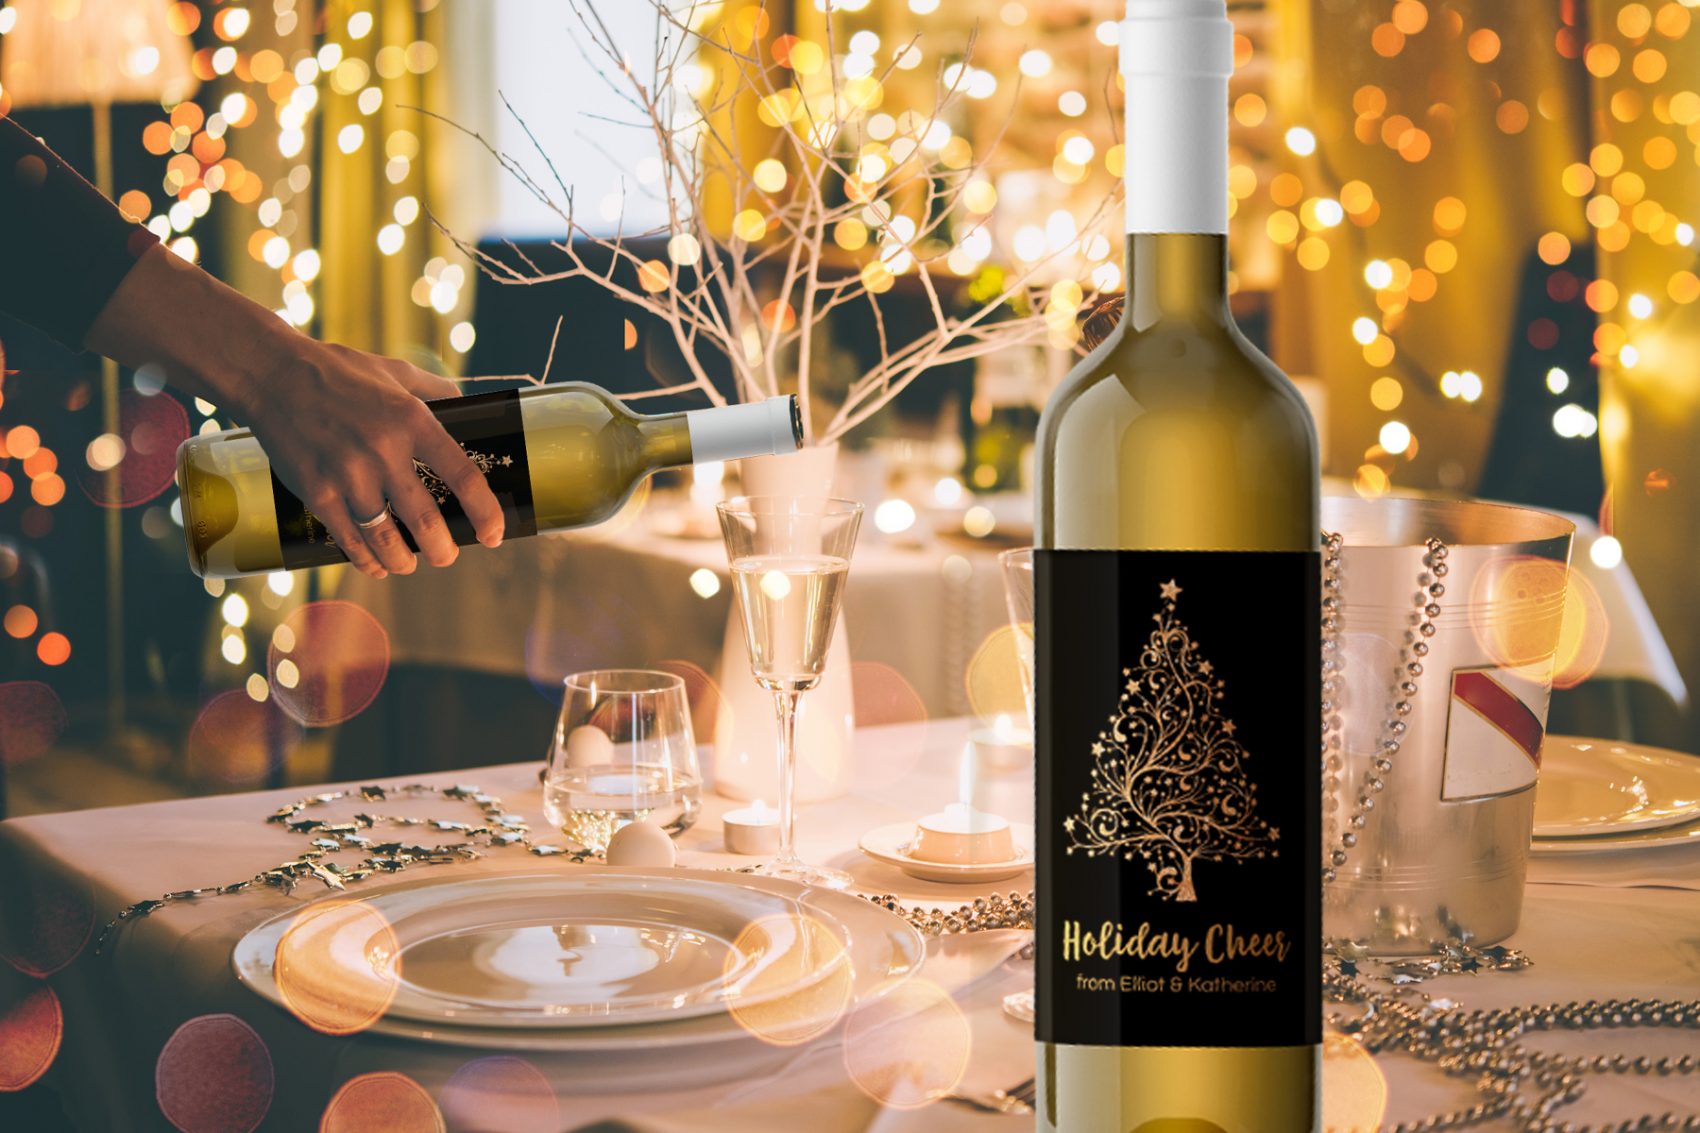 Christmas tree wine labels. Make your own holiday wine labels with your message and a Christmas tree.